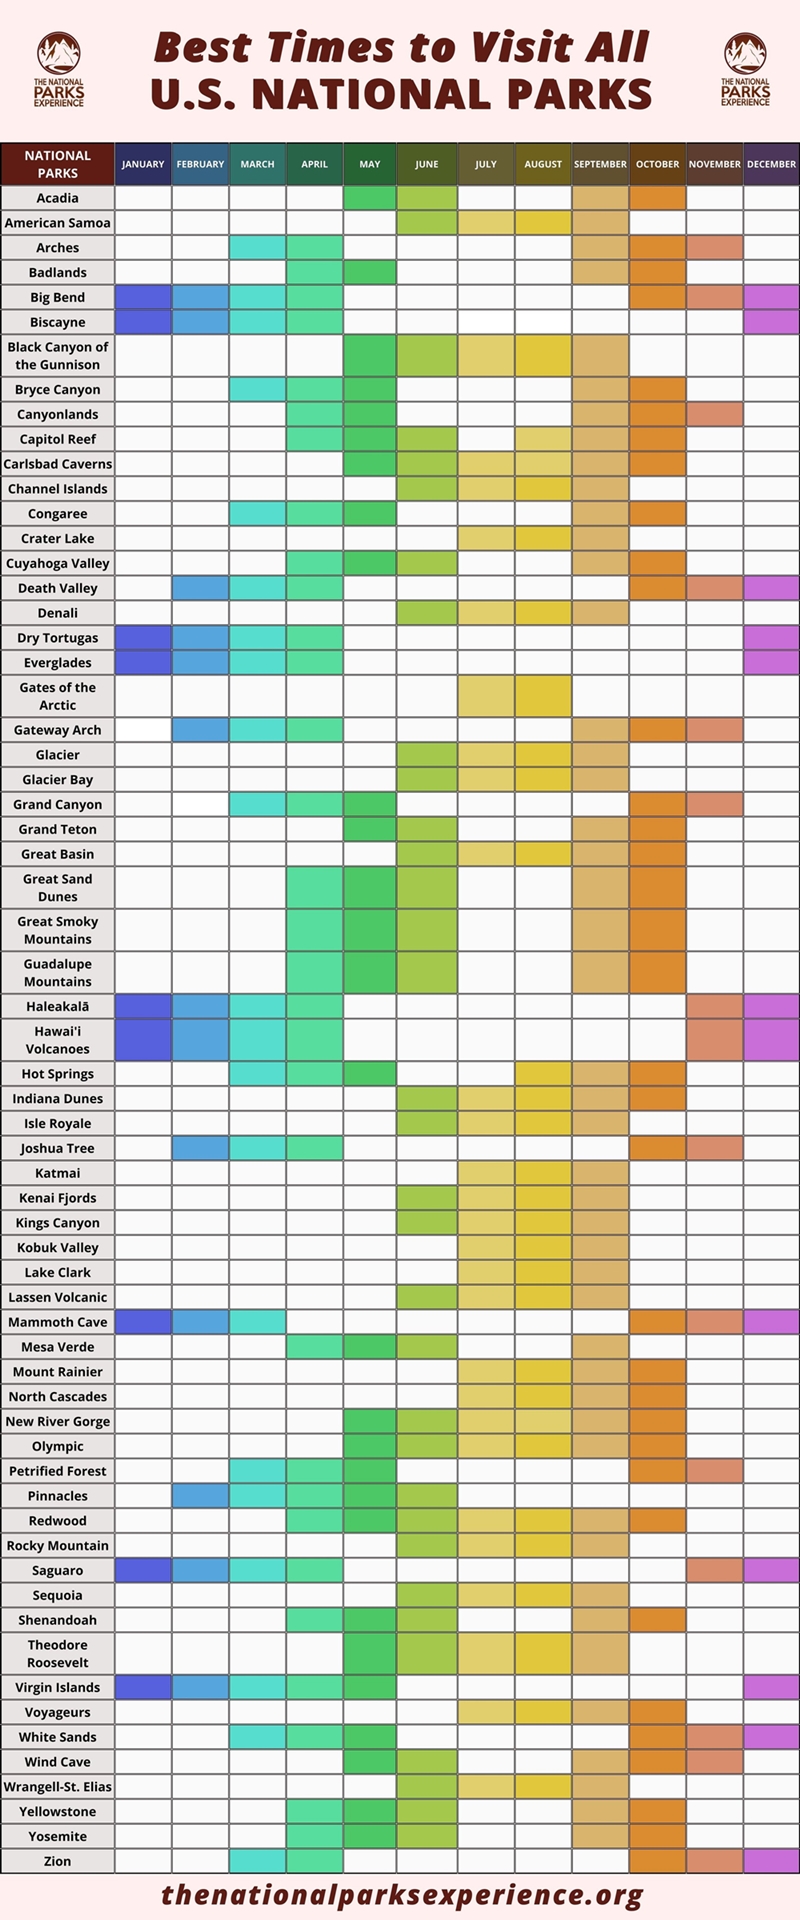 Best-Months-to-Visit-All-U.S.-National-Parks-Colored-Infographic-Table.jpg